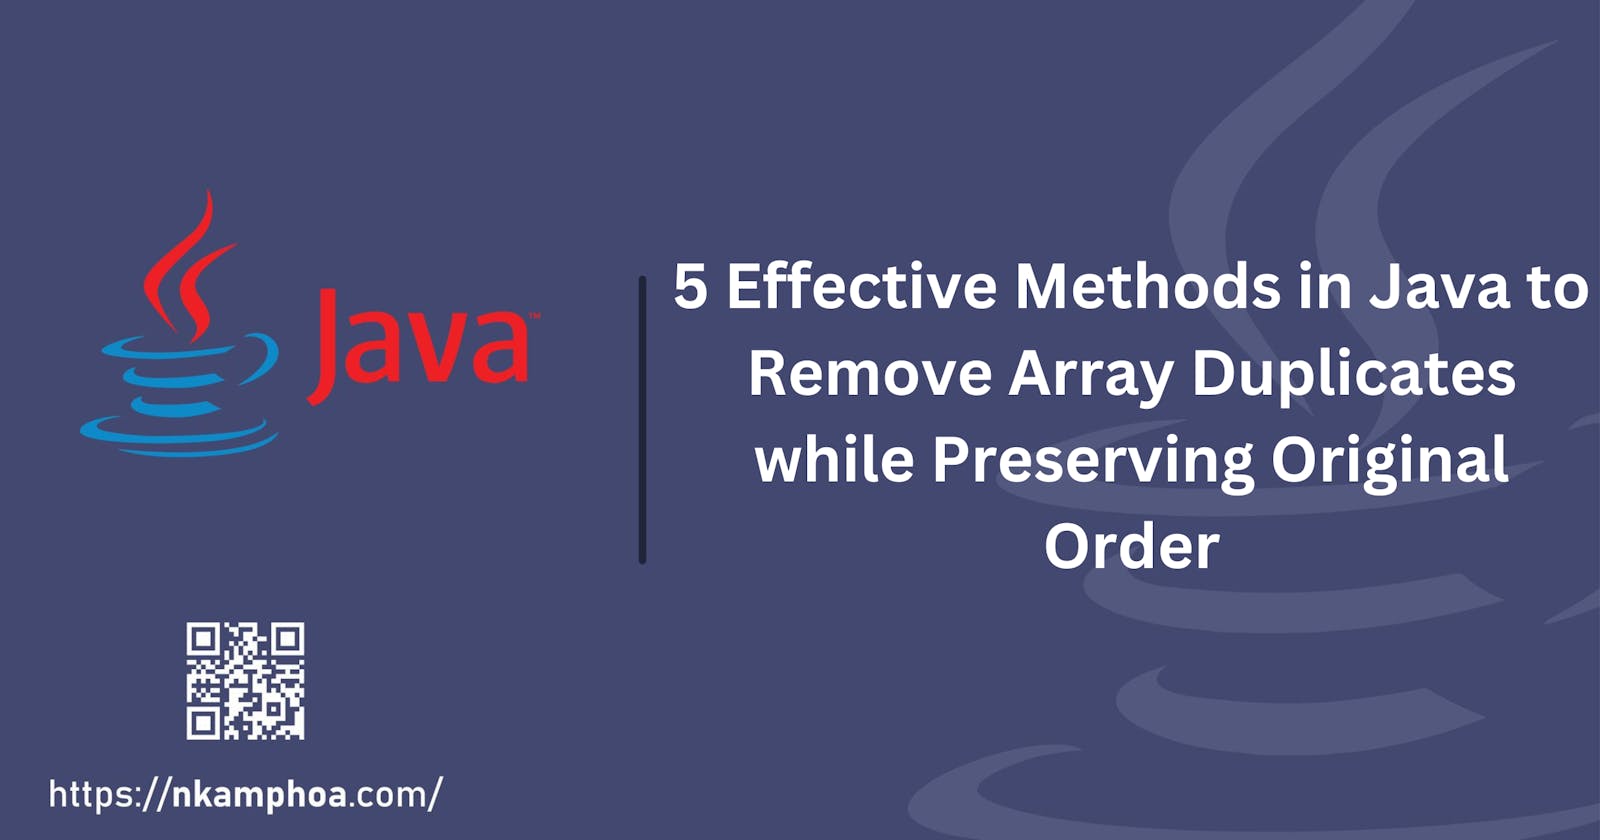 5 Effective Methods in Java to Remove Array Duplicates while Preserving Original Order